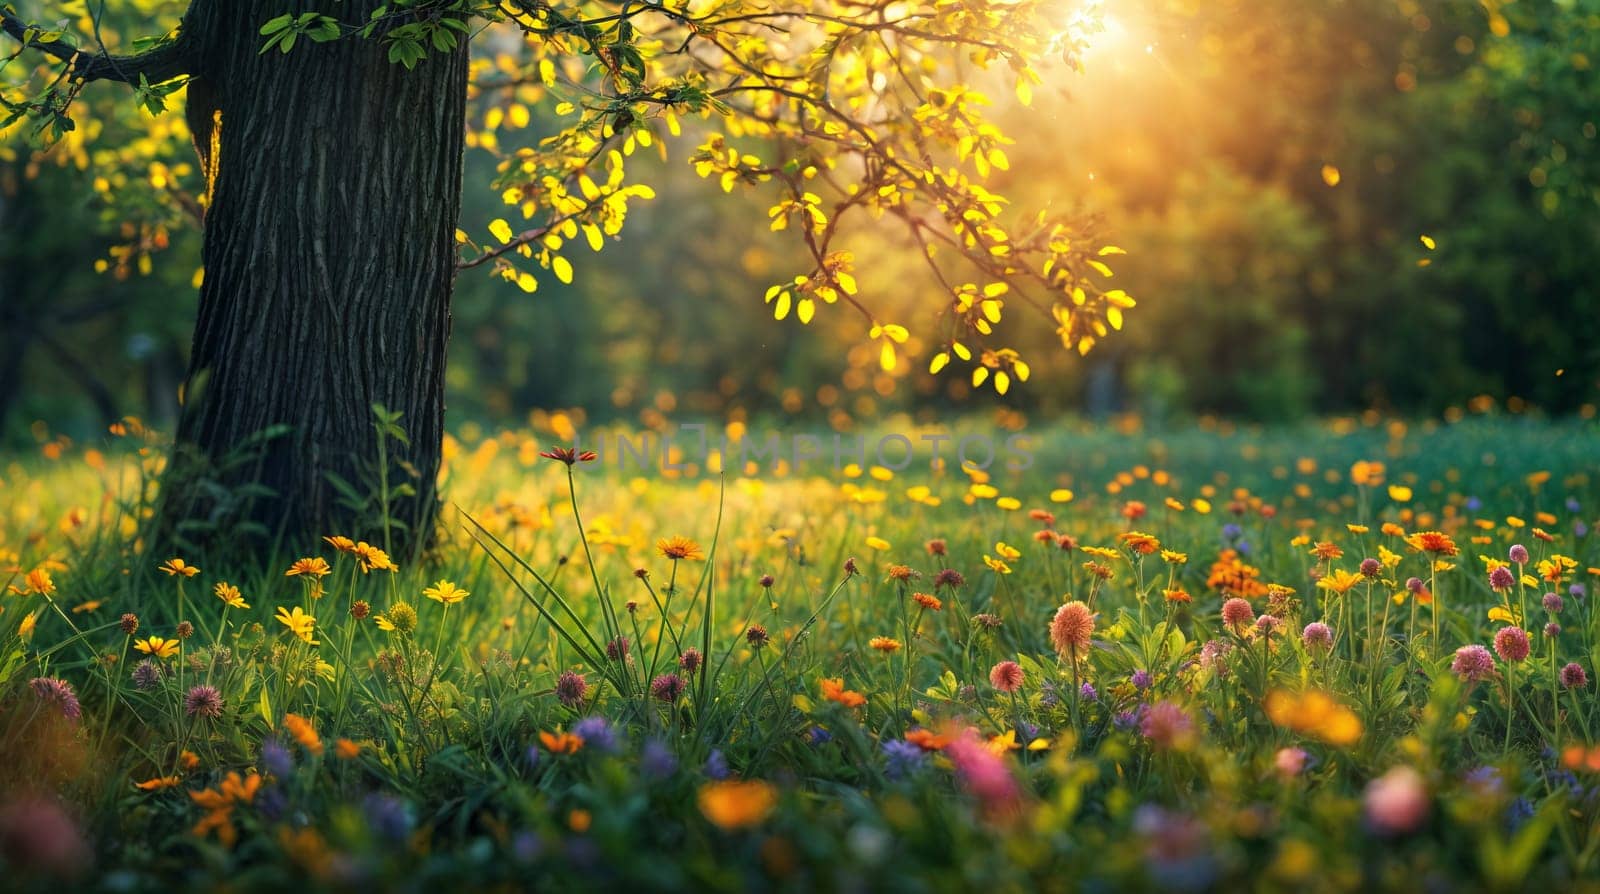 Golden Hour in a Blooming Meadow by chrisroll